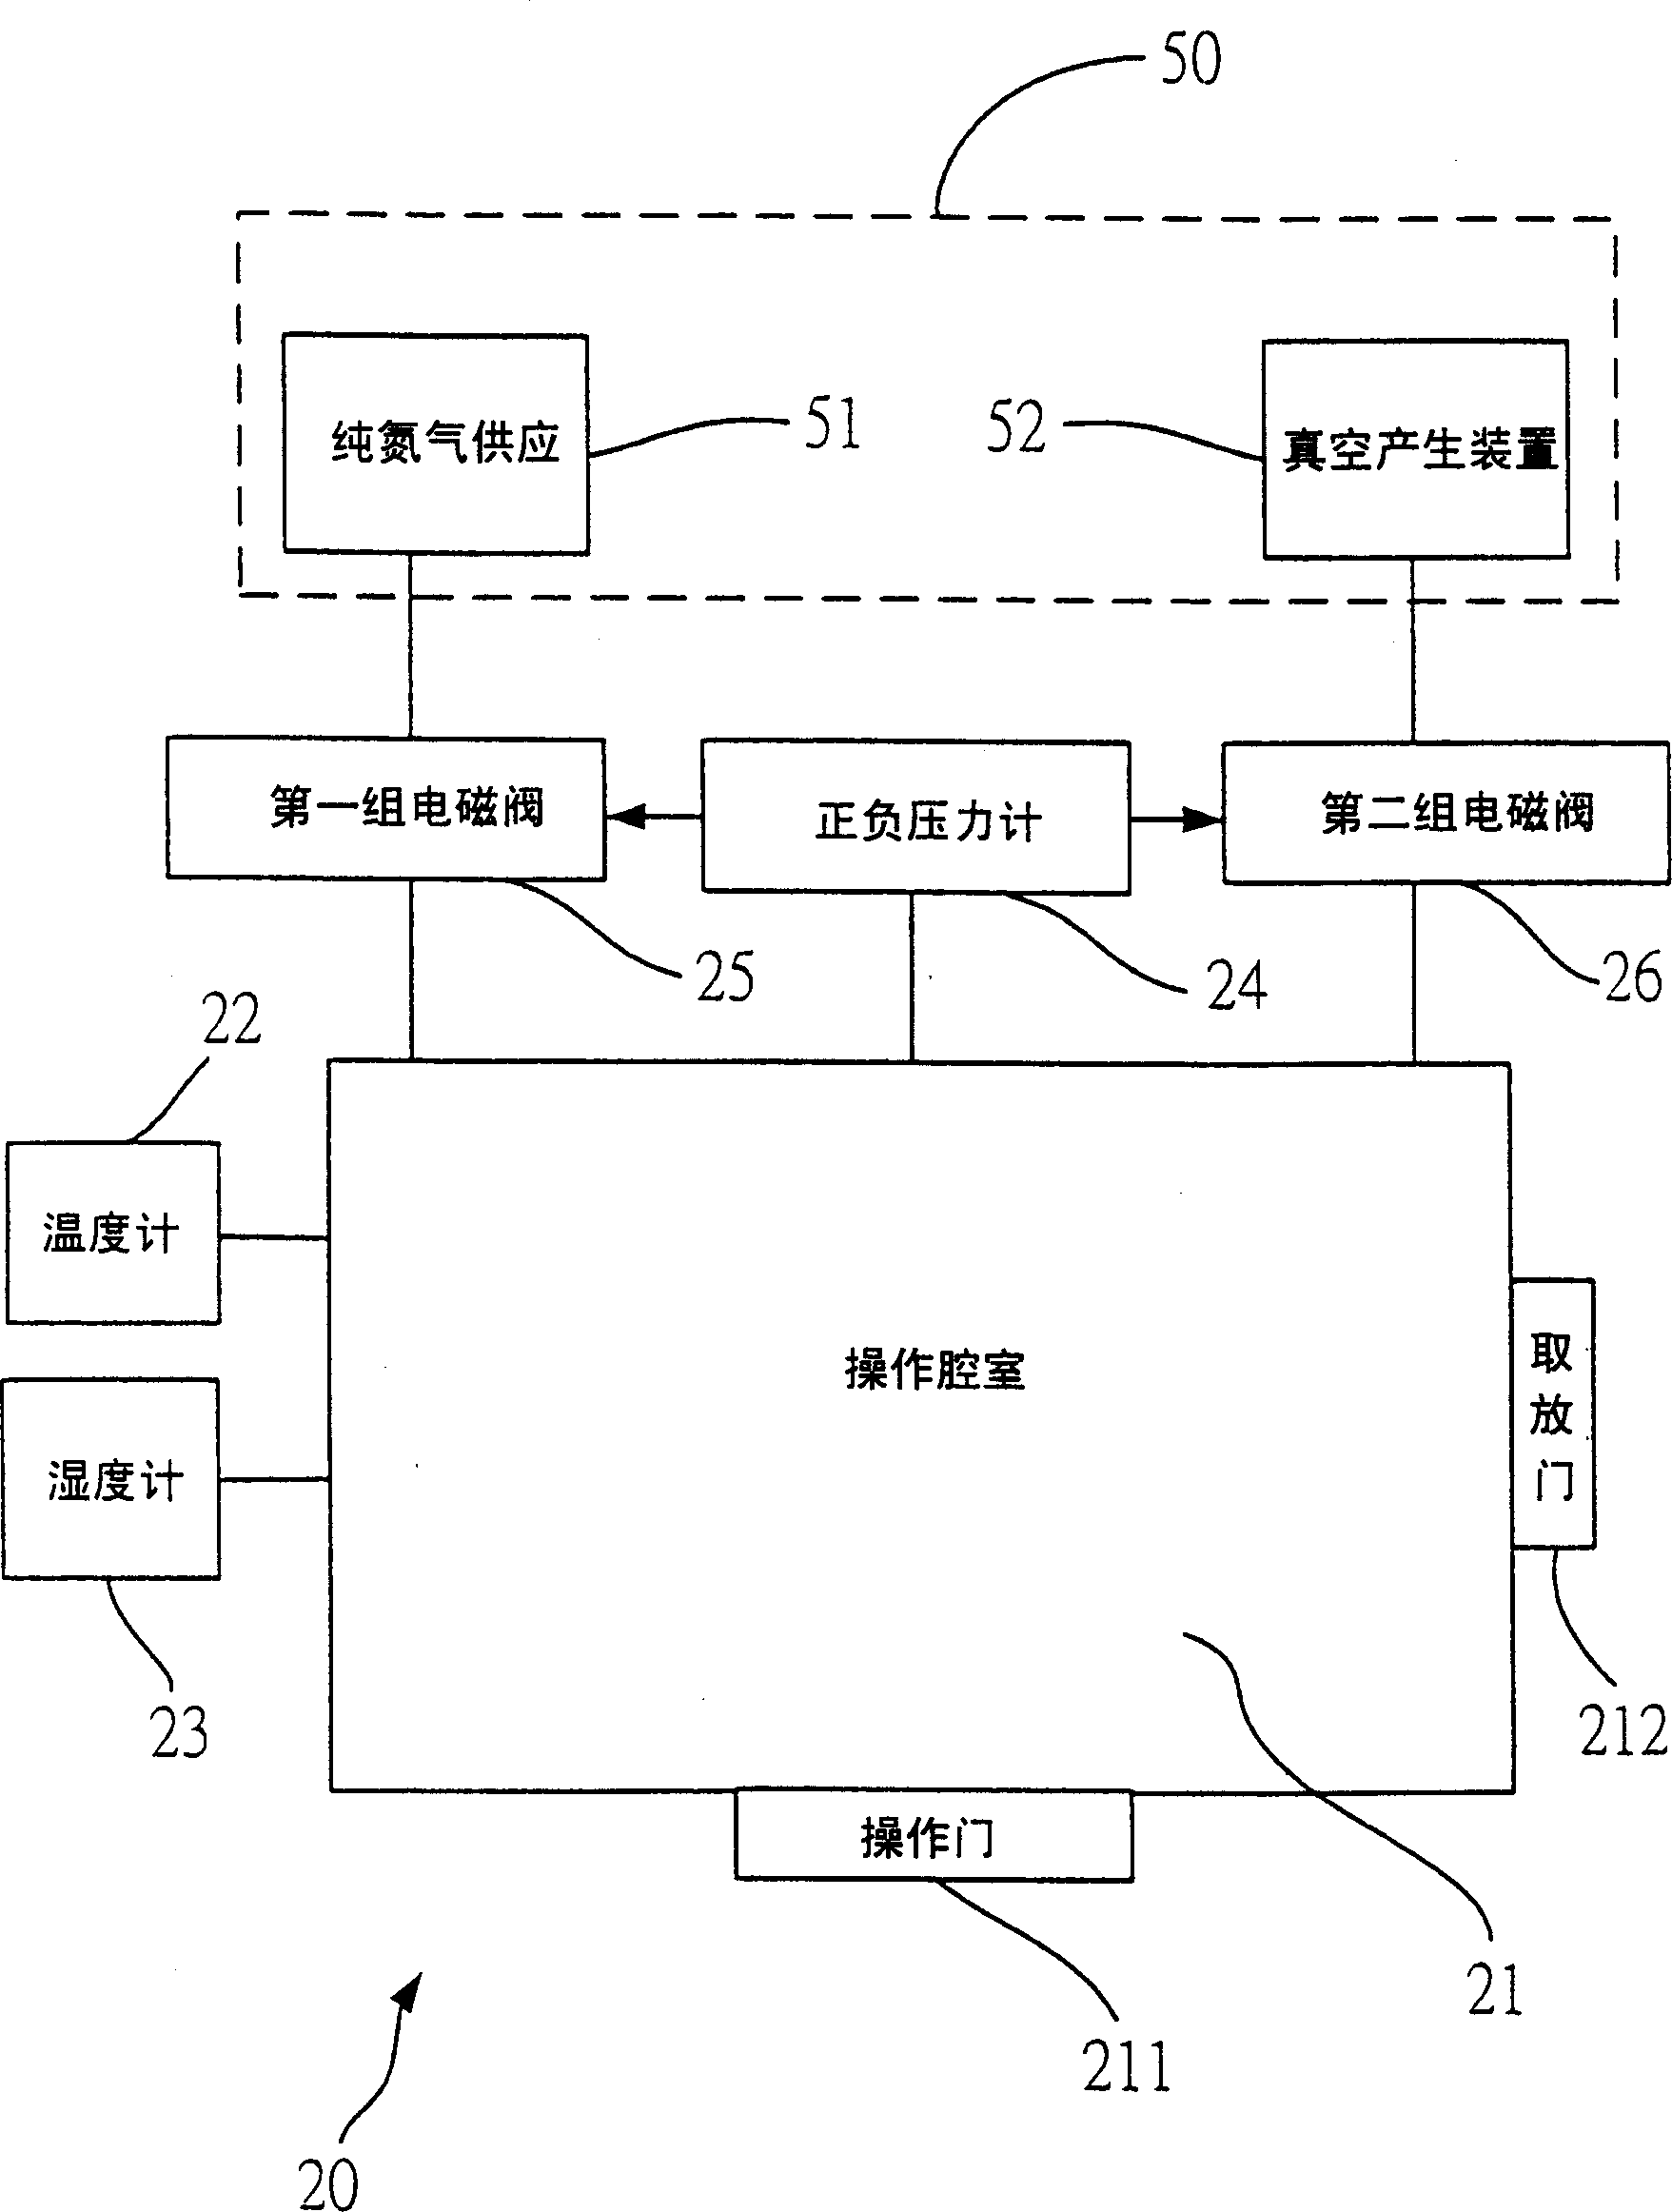 Process and apparatus for low oxygen and low moistness packing